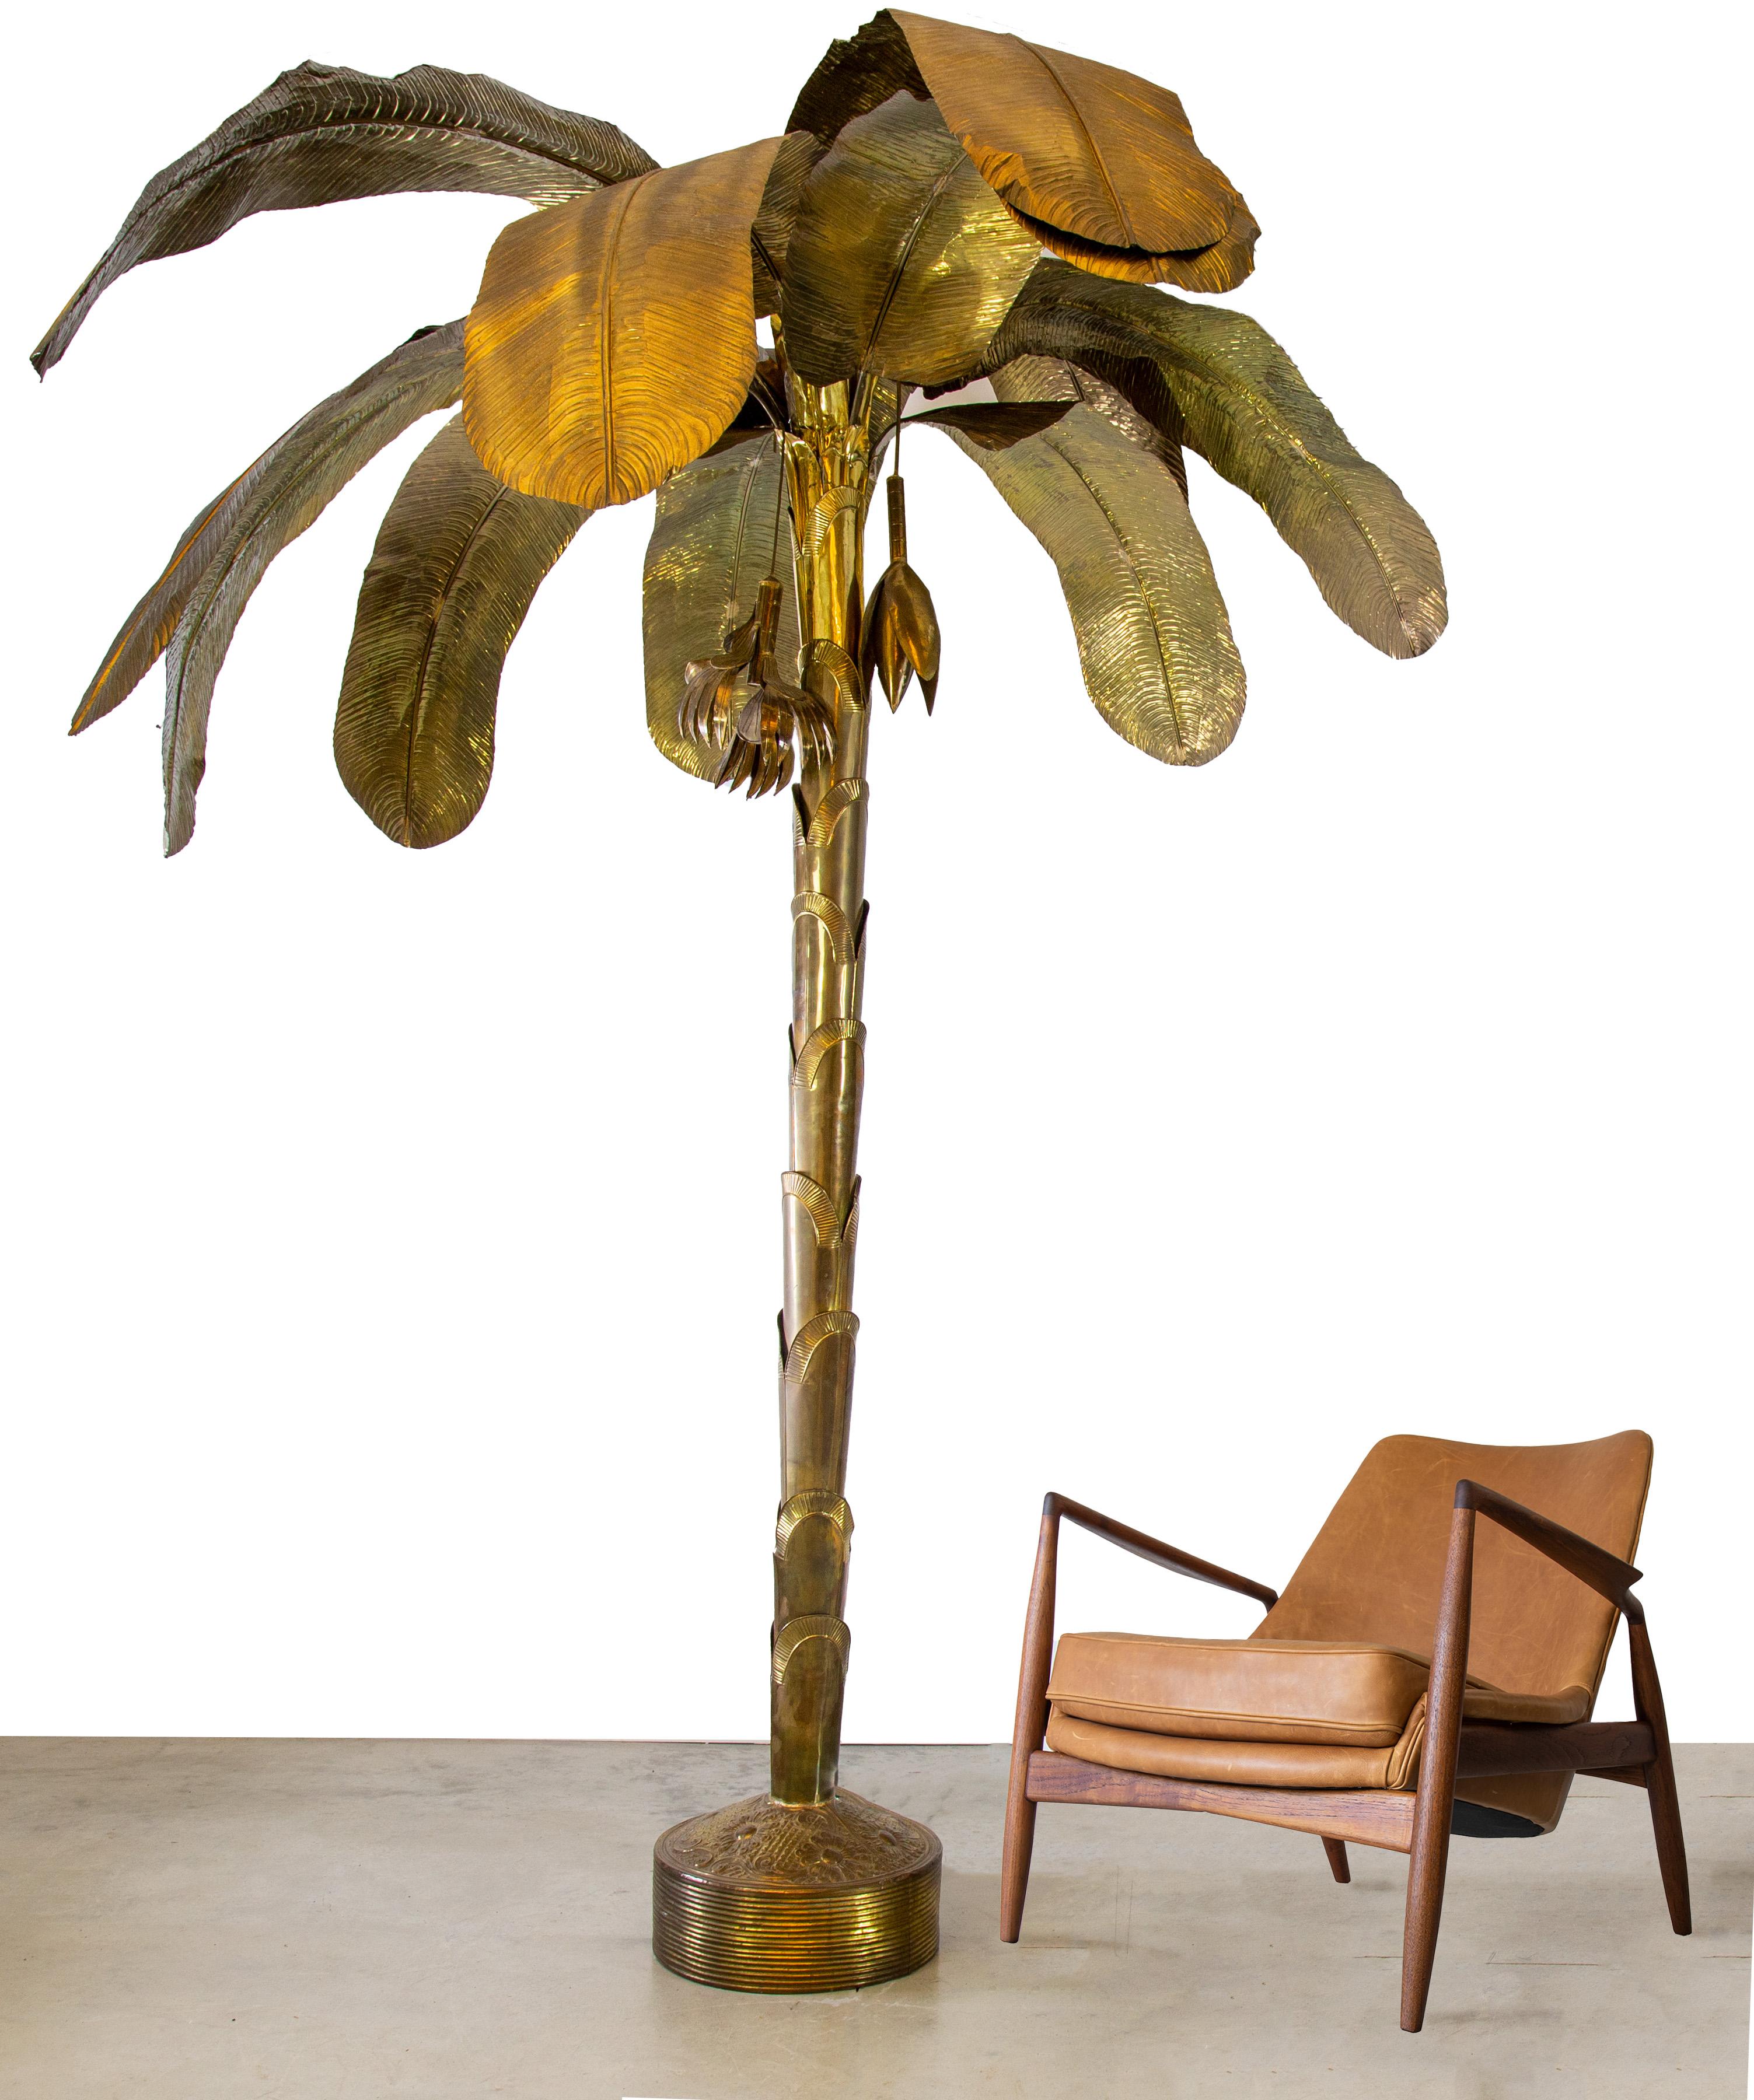 A large brass palm tree sure to take your interior space to the next level. The was purchased in the 1980s for over $8000 and is. Single family owner. Great patina to the brass which picks up light and shadows and makes it feel like a real tree. The